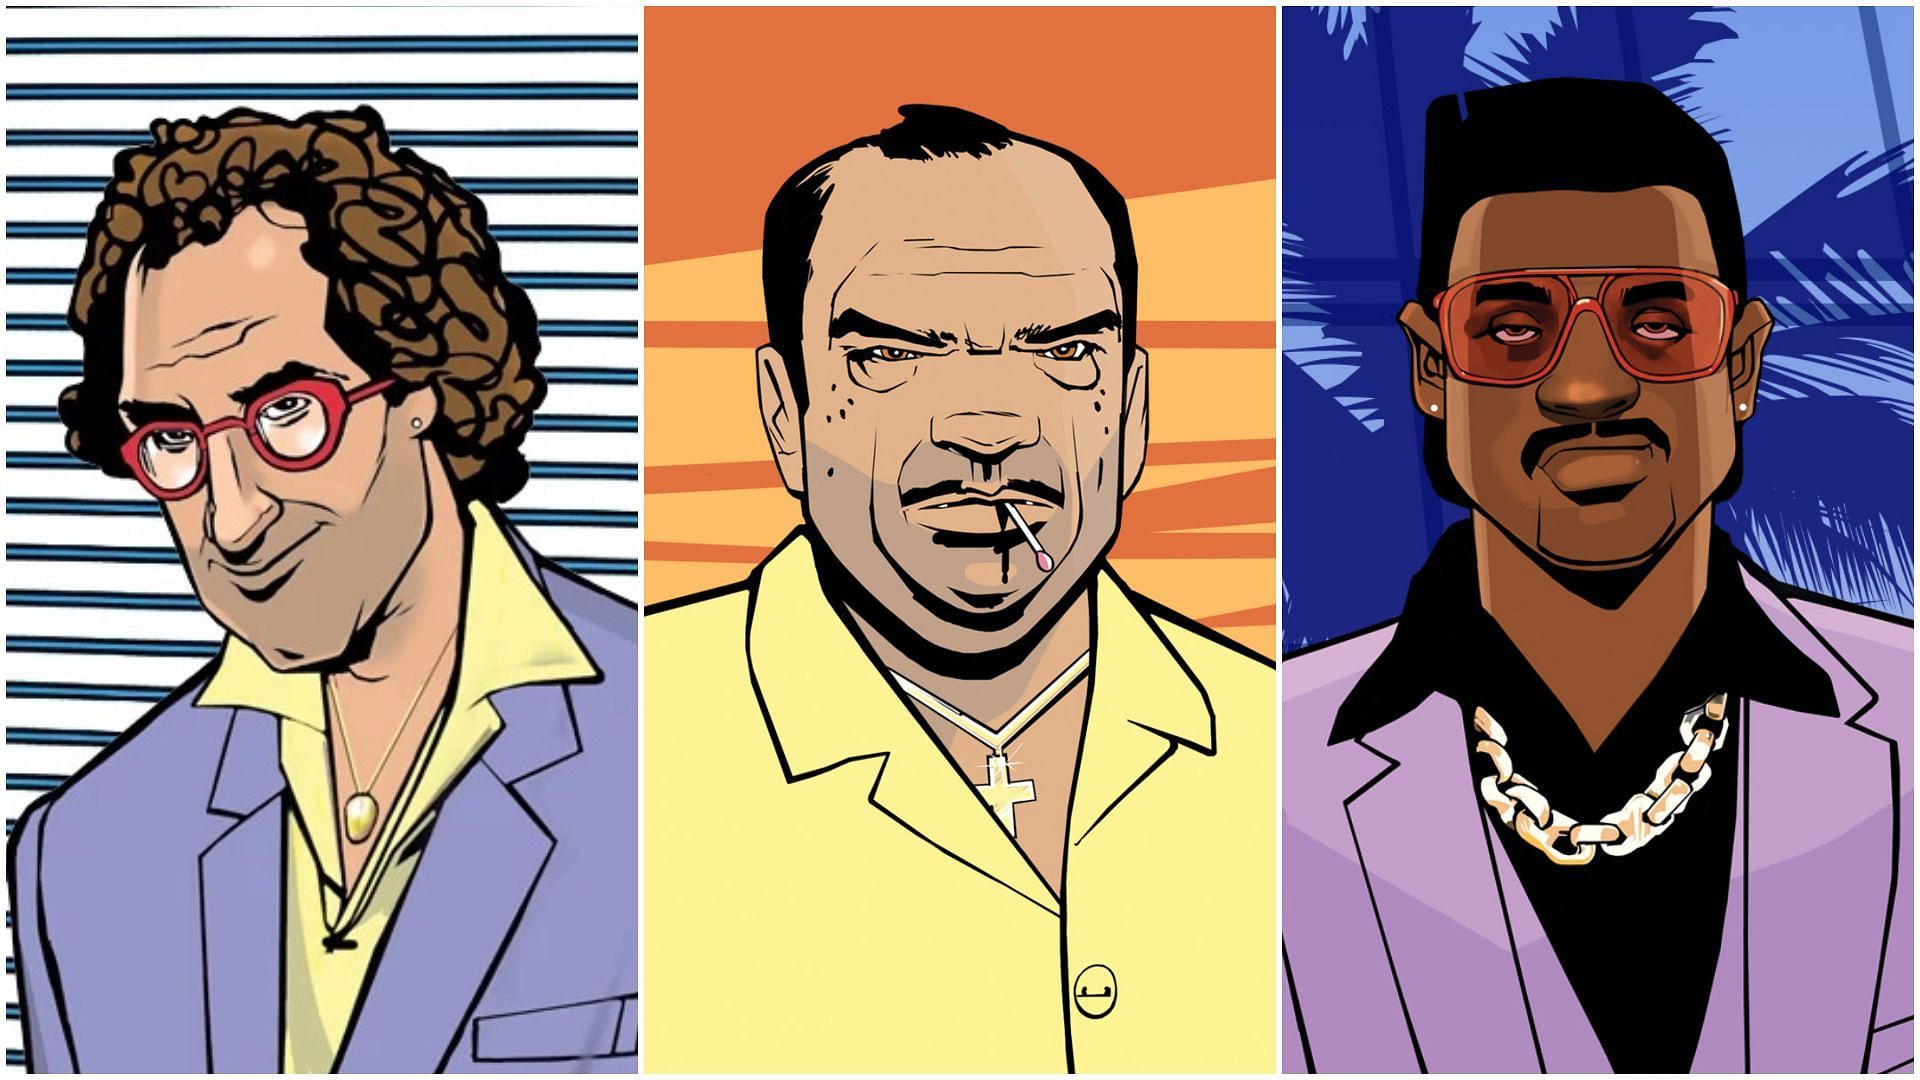 GTA Vice City introduced players to some iconic characters who are hard to forget (Image via Sportskeeda)